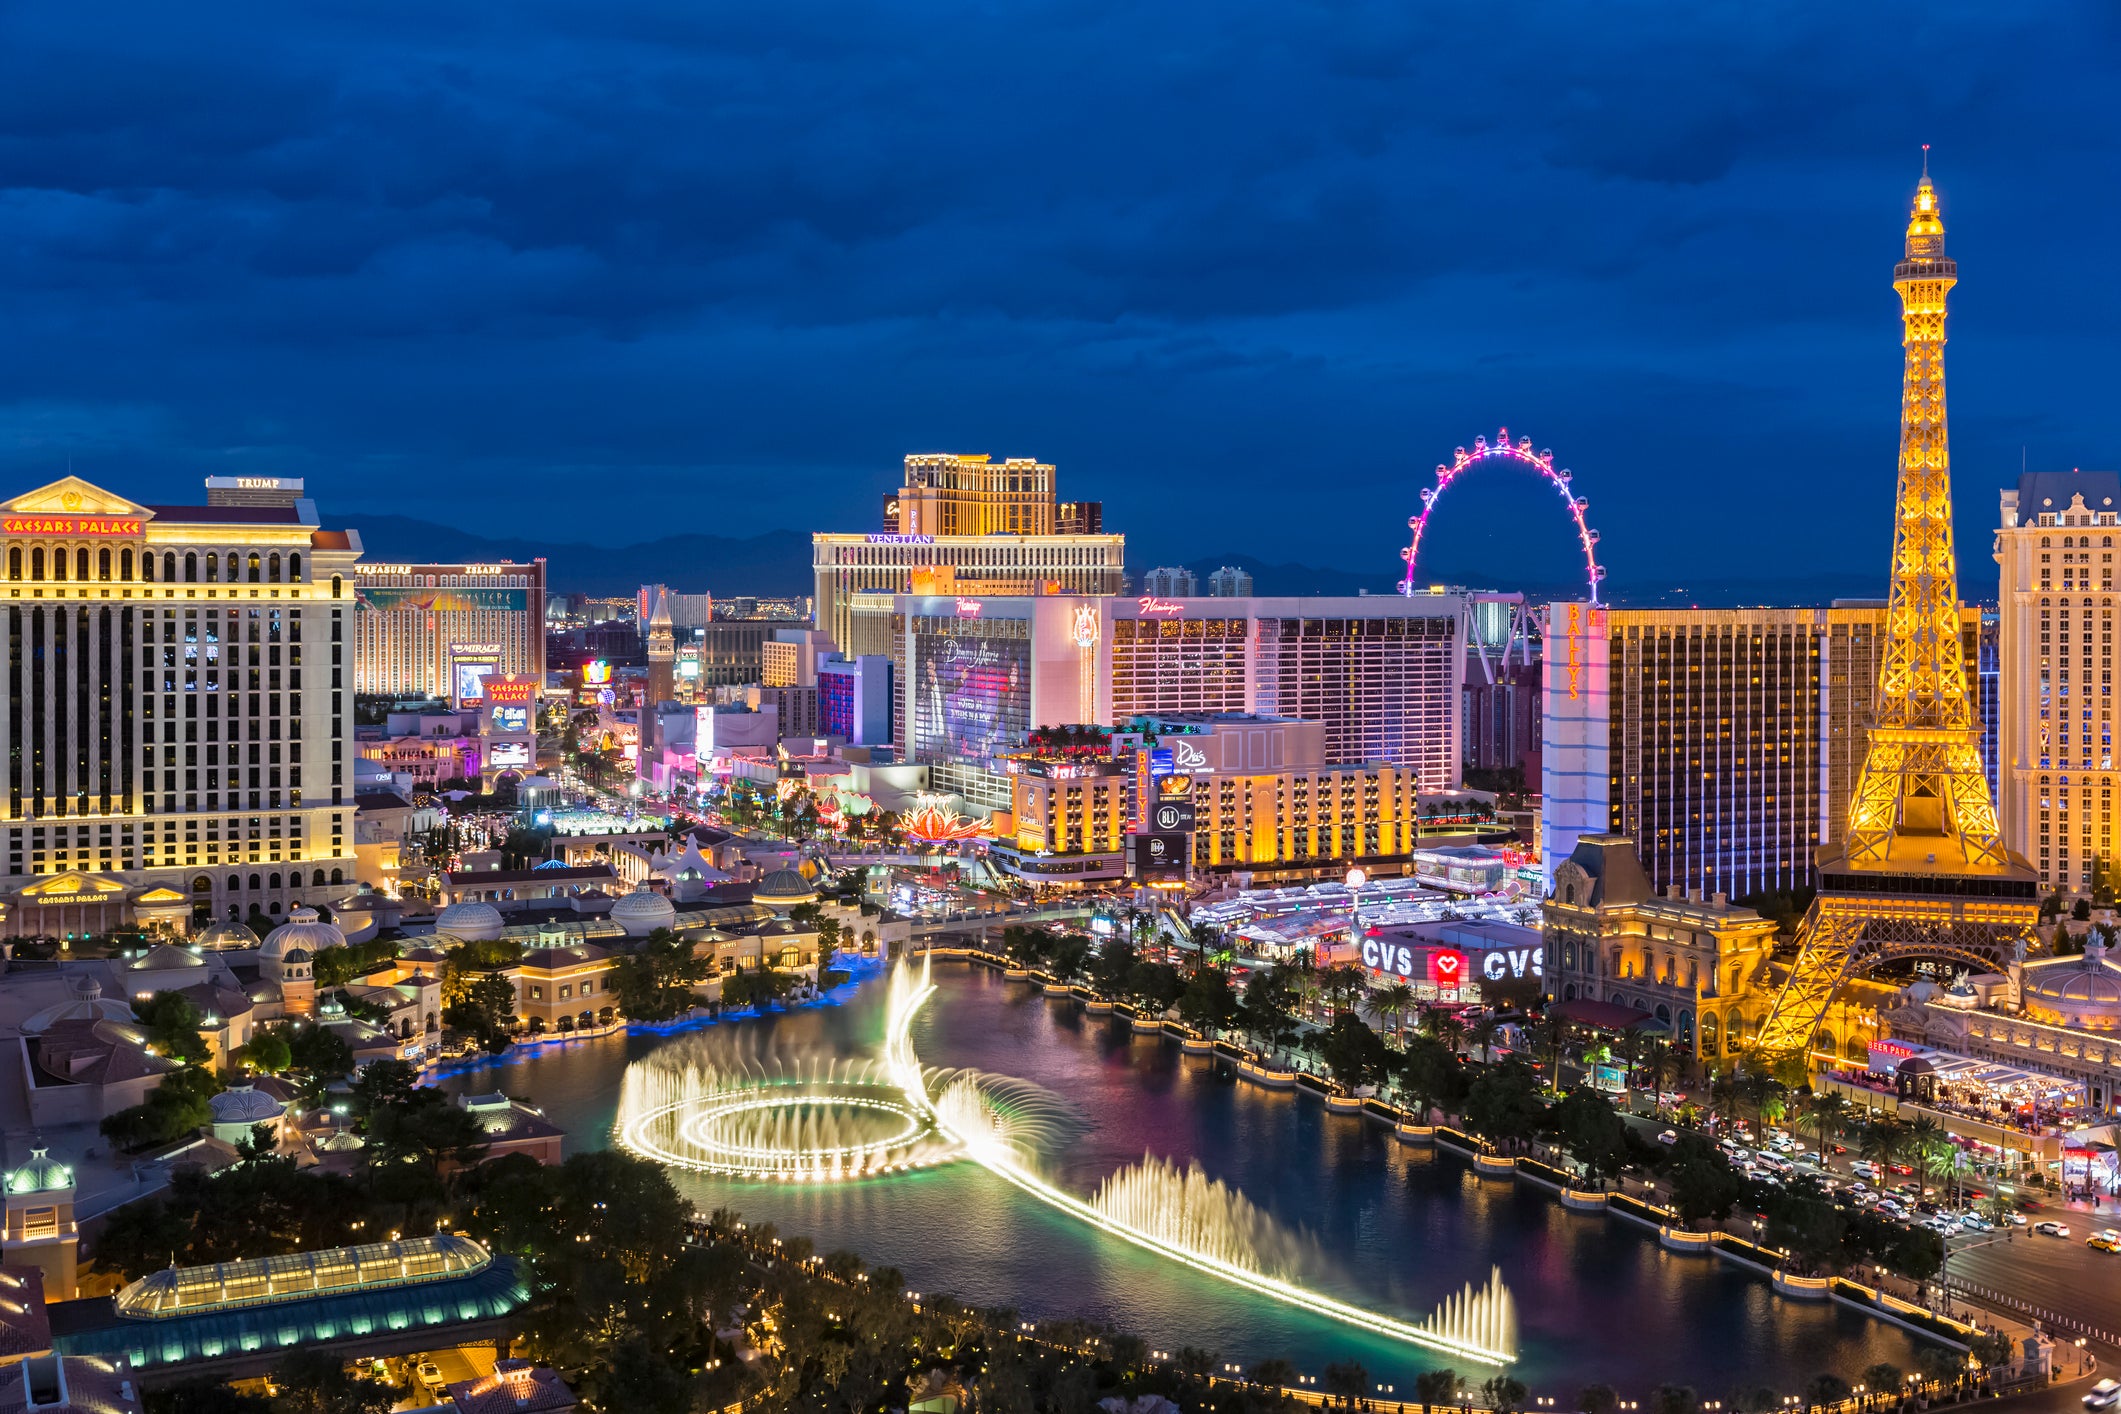 Headed To Vegas For The Usher Residency? Here's How To Make The Most Of Your Trip To Sin City